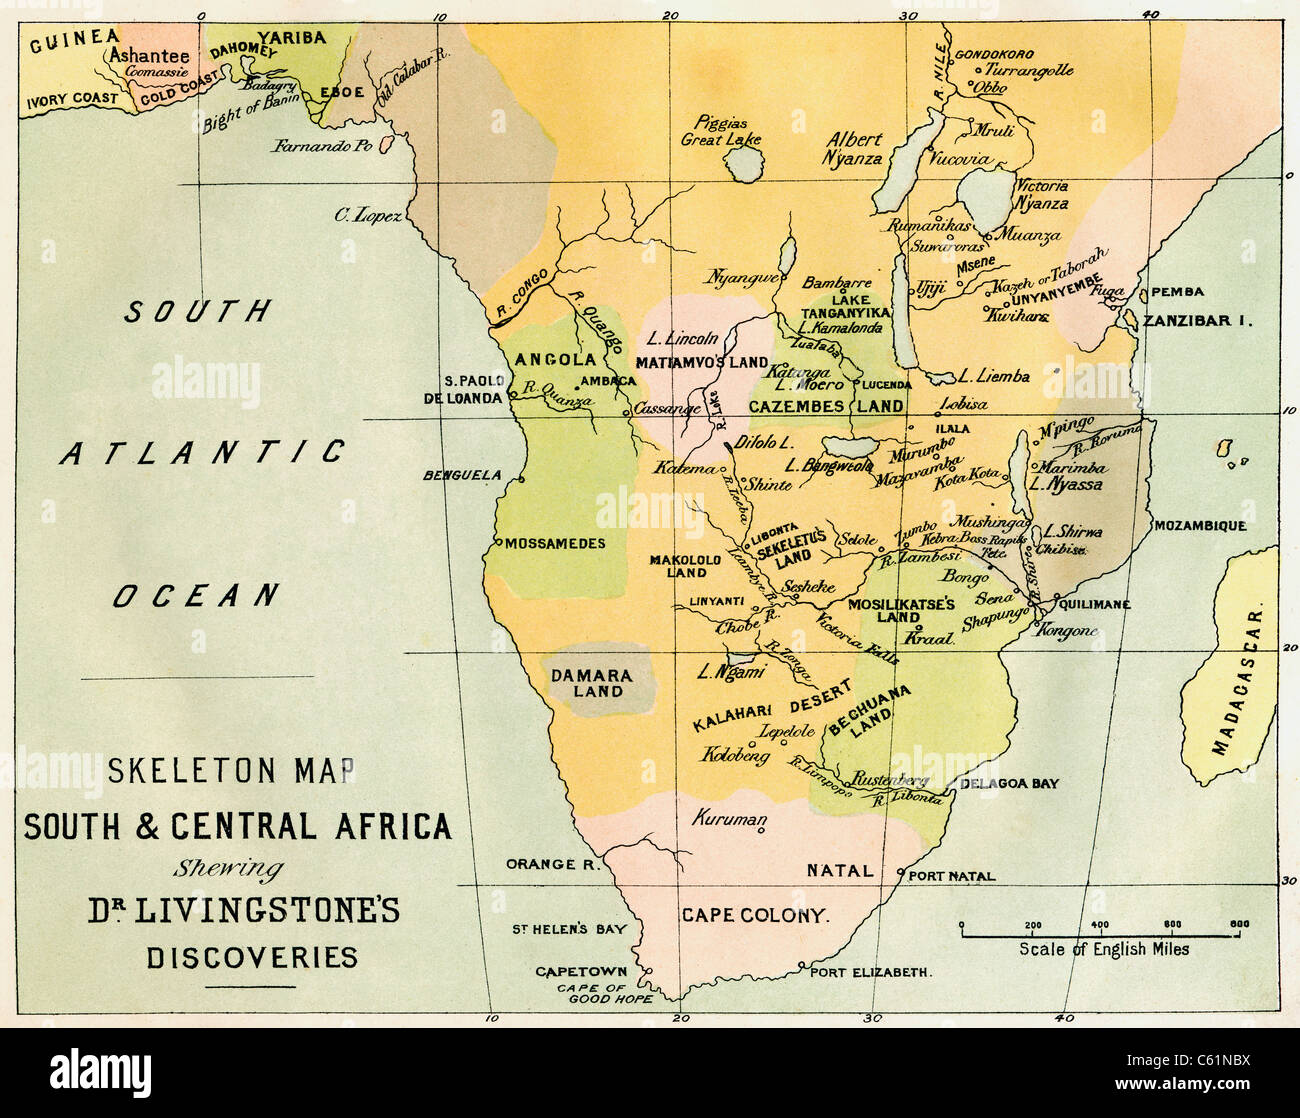 Skeleton map of South and Central Africa showing David Livingstone's discoveries. Stock Photo